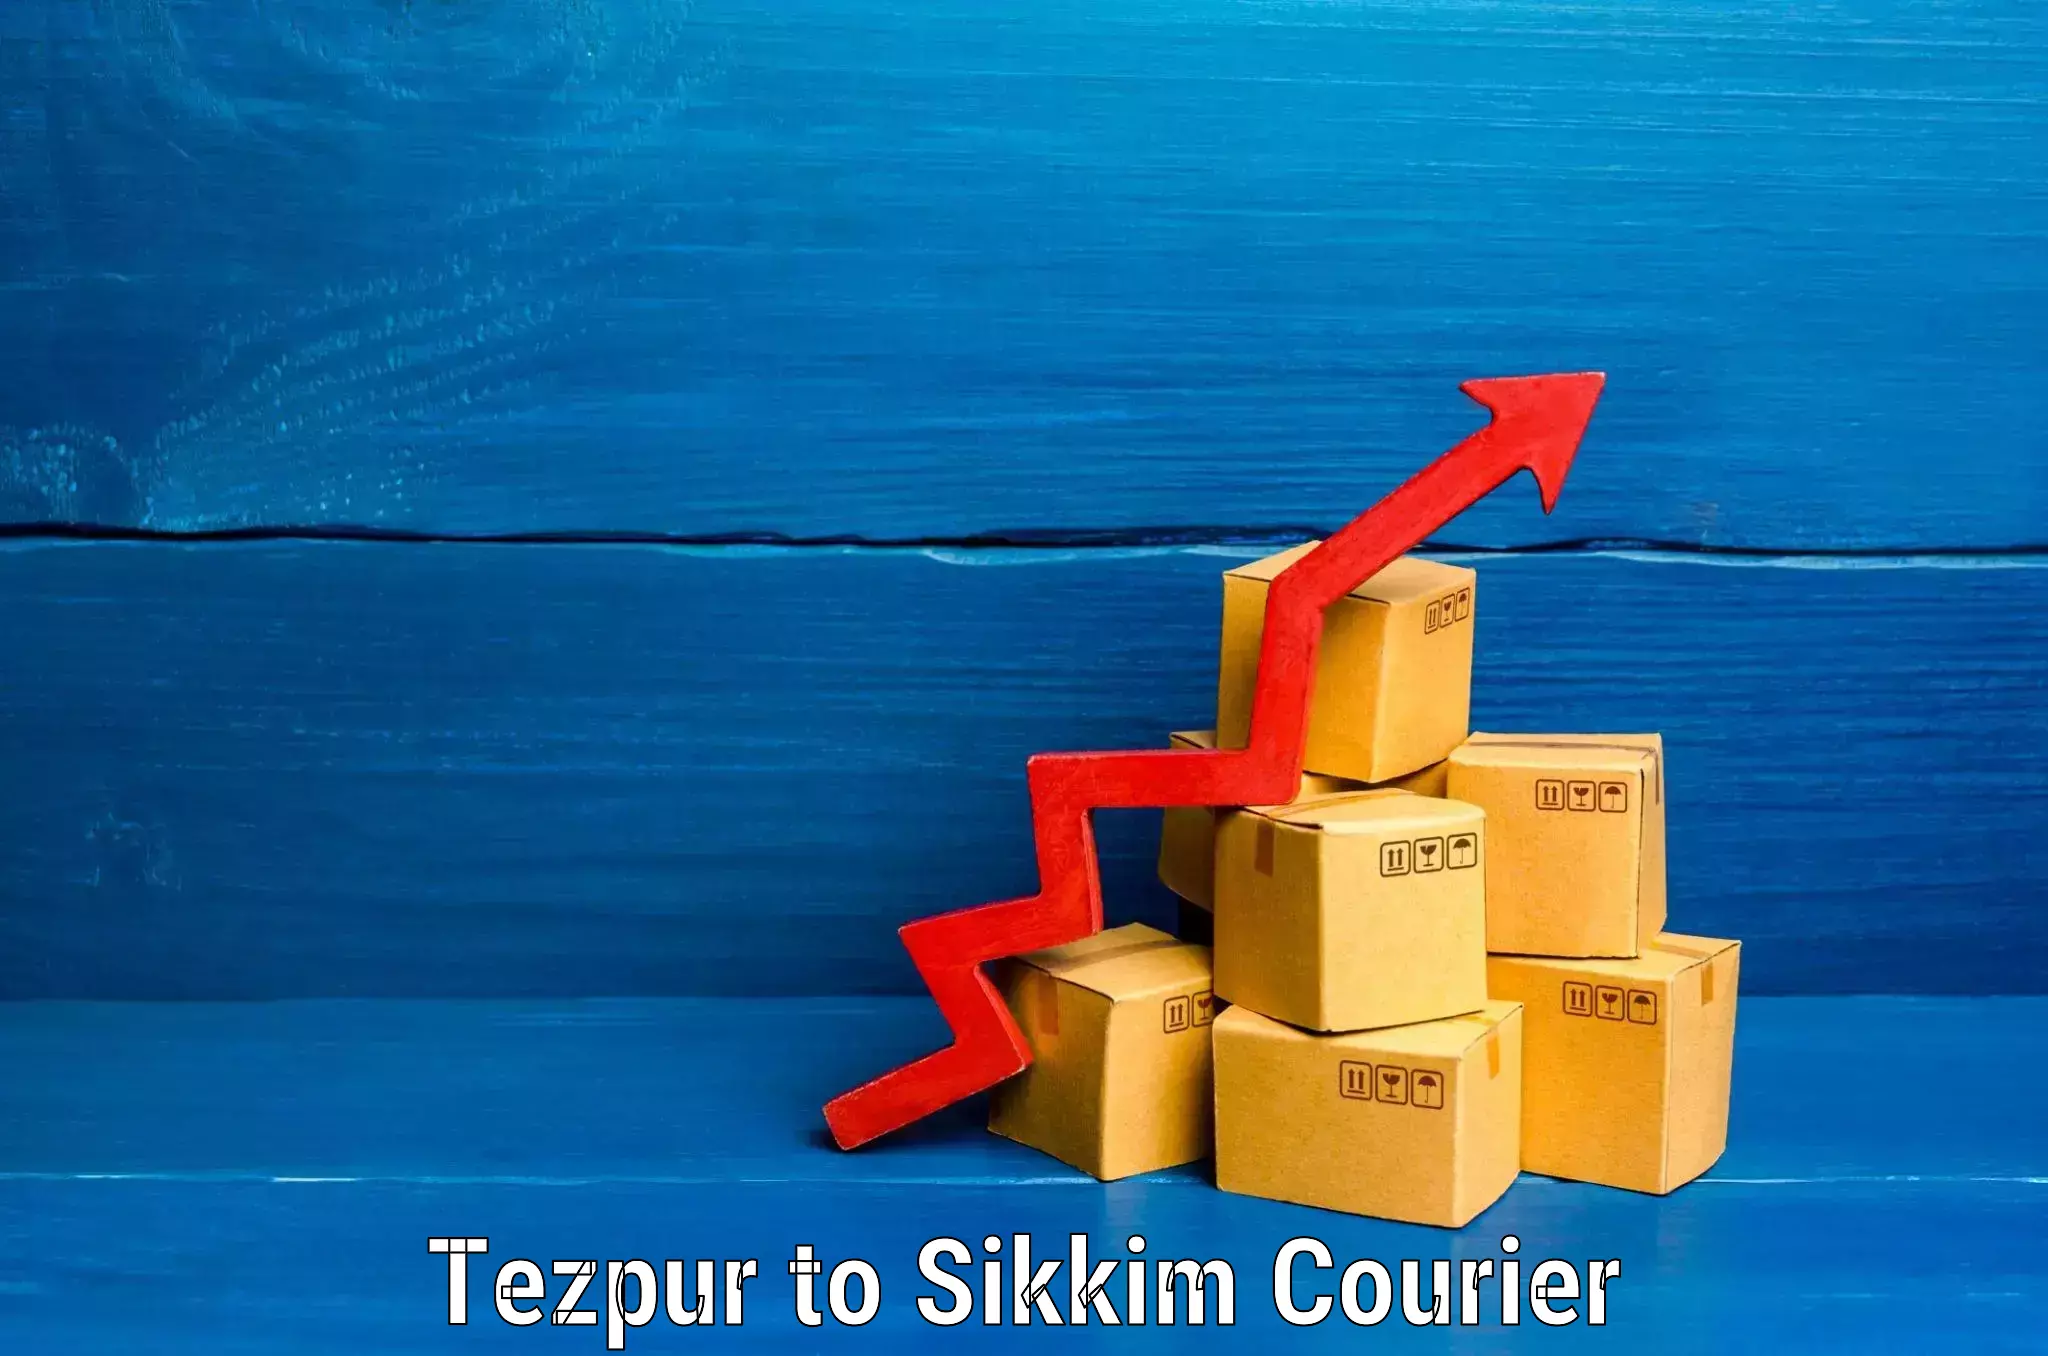 Luggage transport consultancy Tezpur to Sikkim